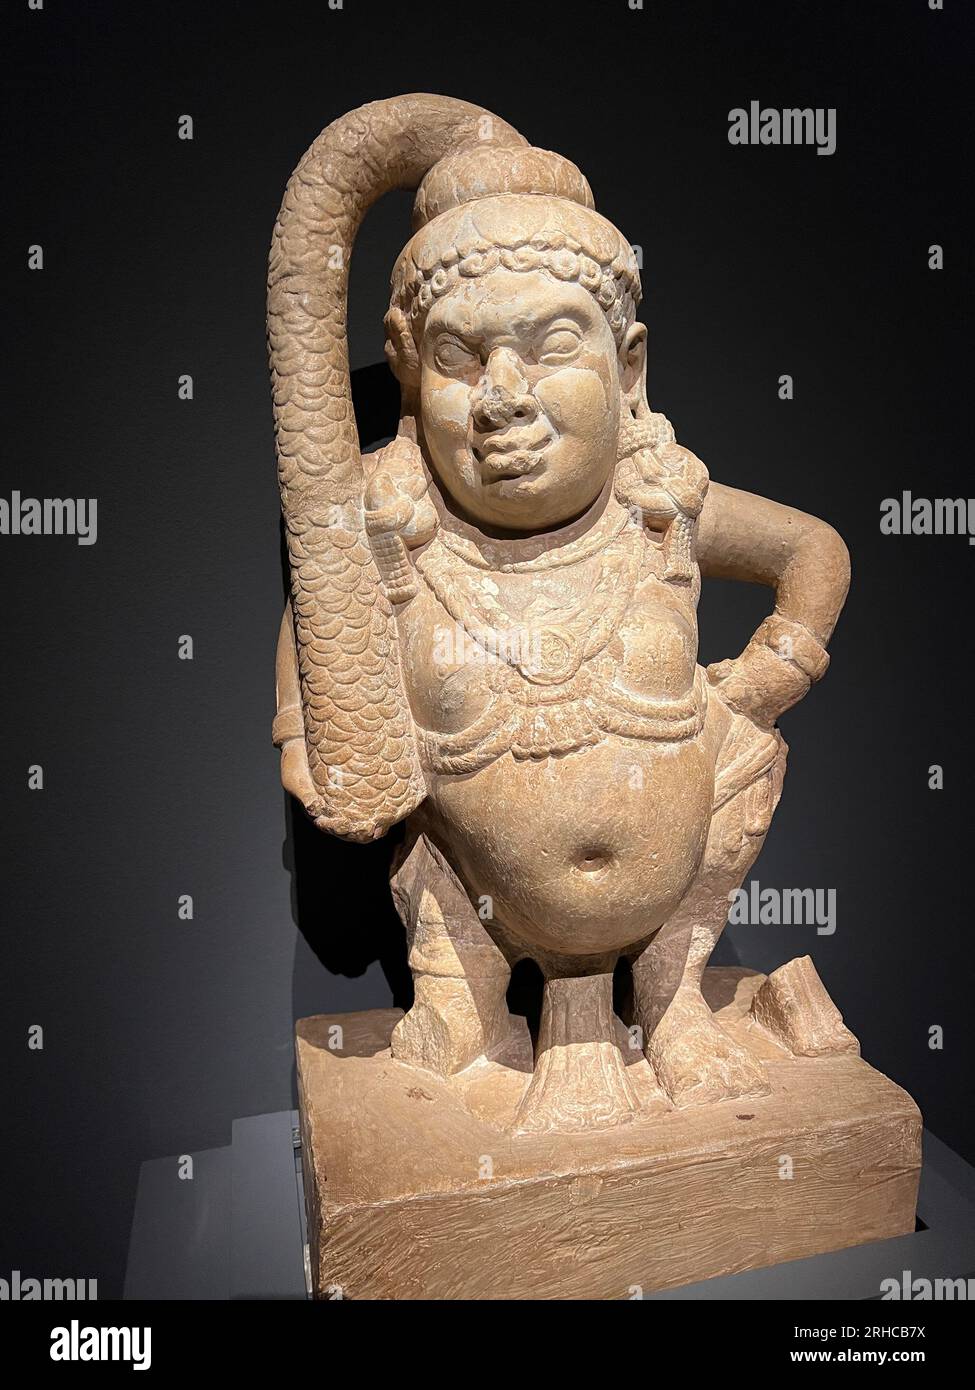 Yaksha Padmanidhi, the wealth guardian with a lotus crown.    Nagarjunakonda, Guntur district, Andra Pradesh Ikshvaku, 3rd-4th century CE.    Padmanidhi and his companion Sankhanidhi served as the chief attendants of Kubera, god of wealth, guarding his hoarded riches. The figure here has the squat physique of the goblin protectors of the spirit world. Limestone Stock Photo